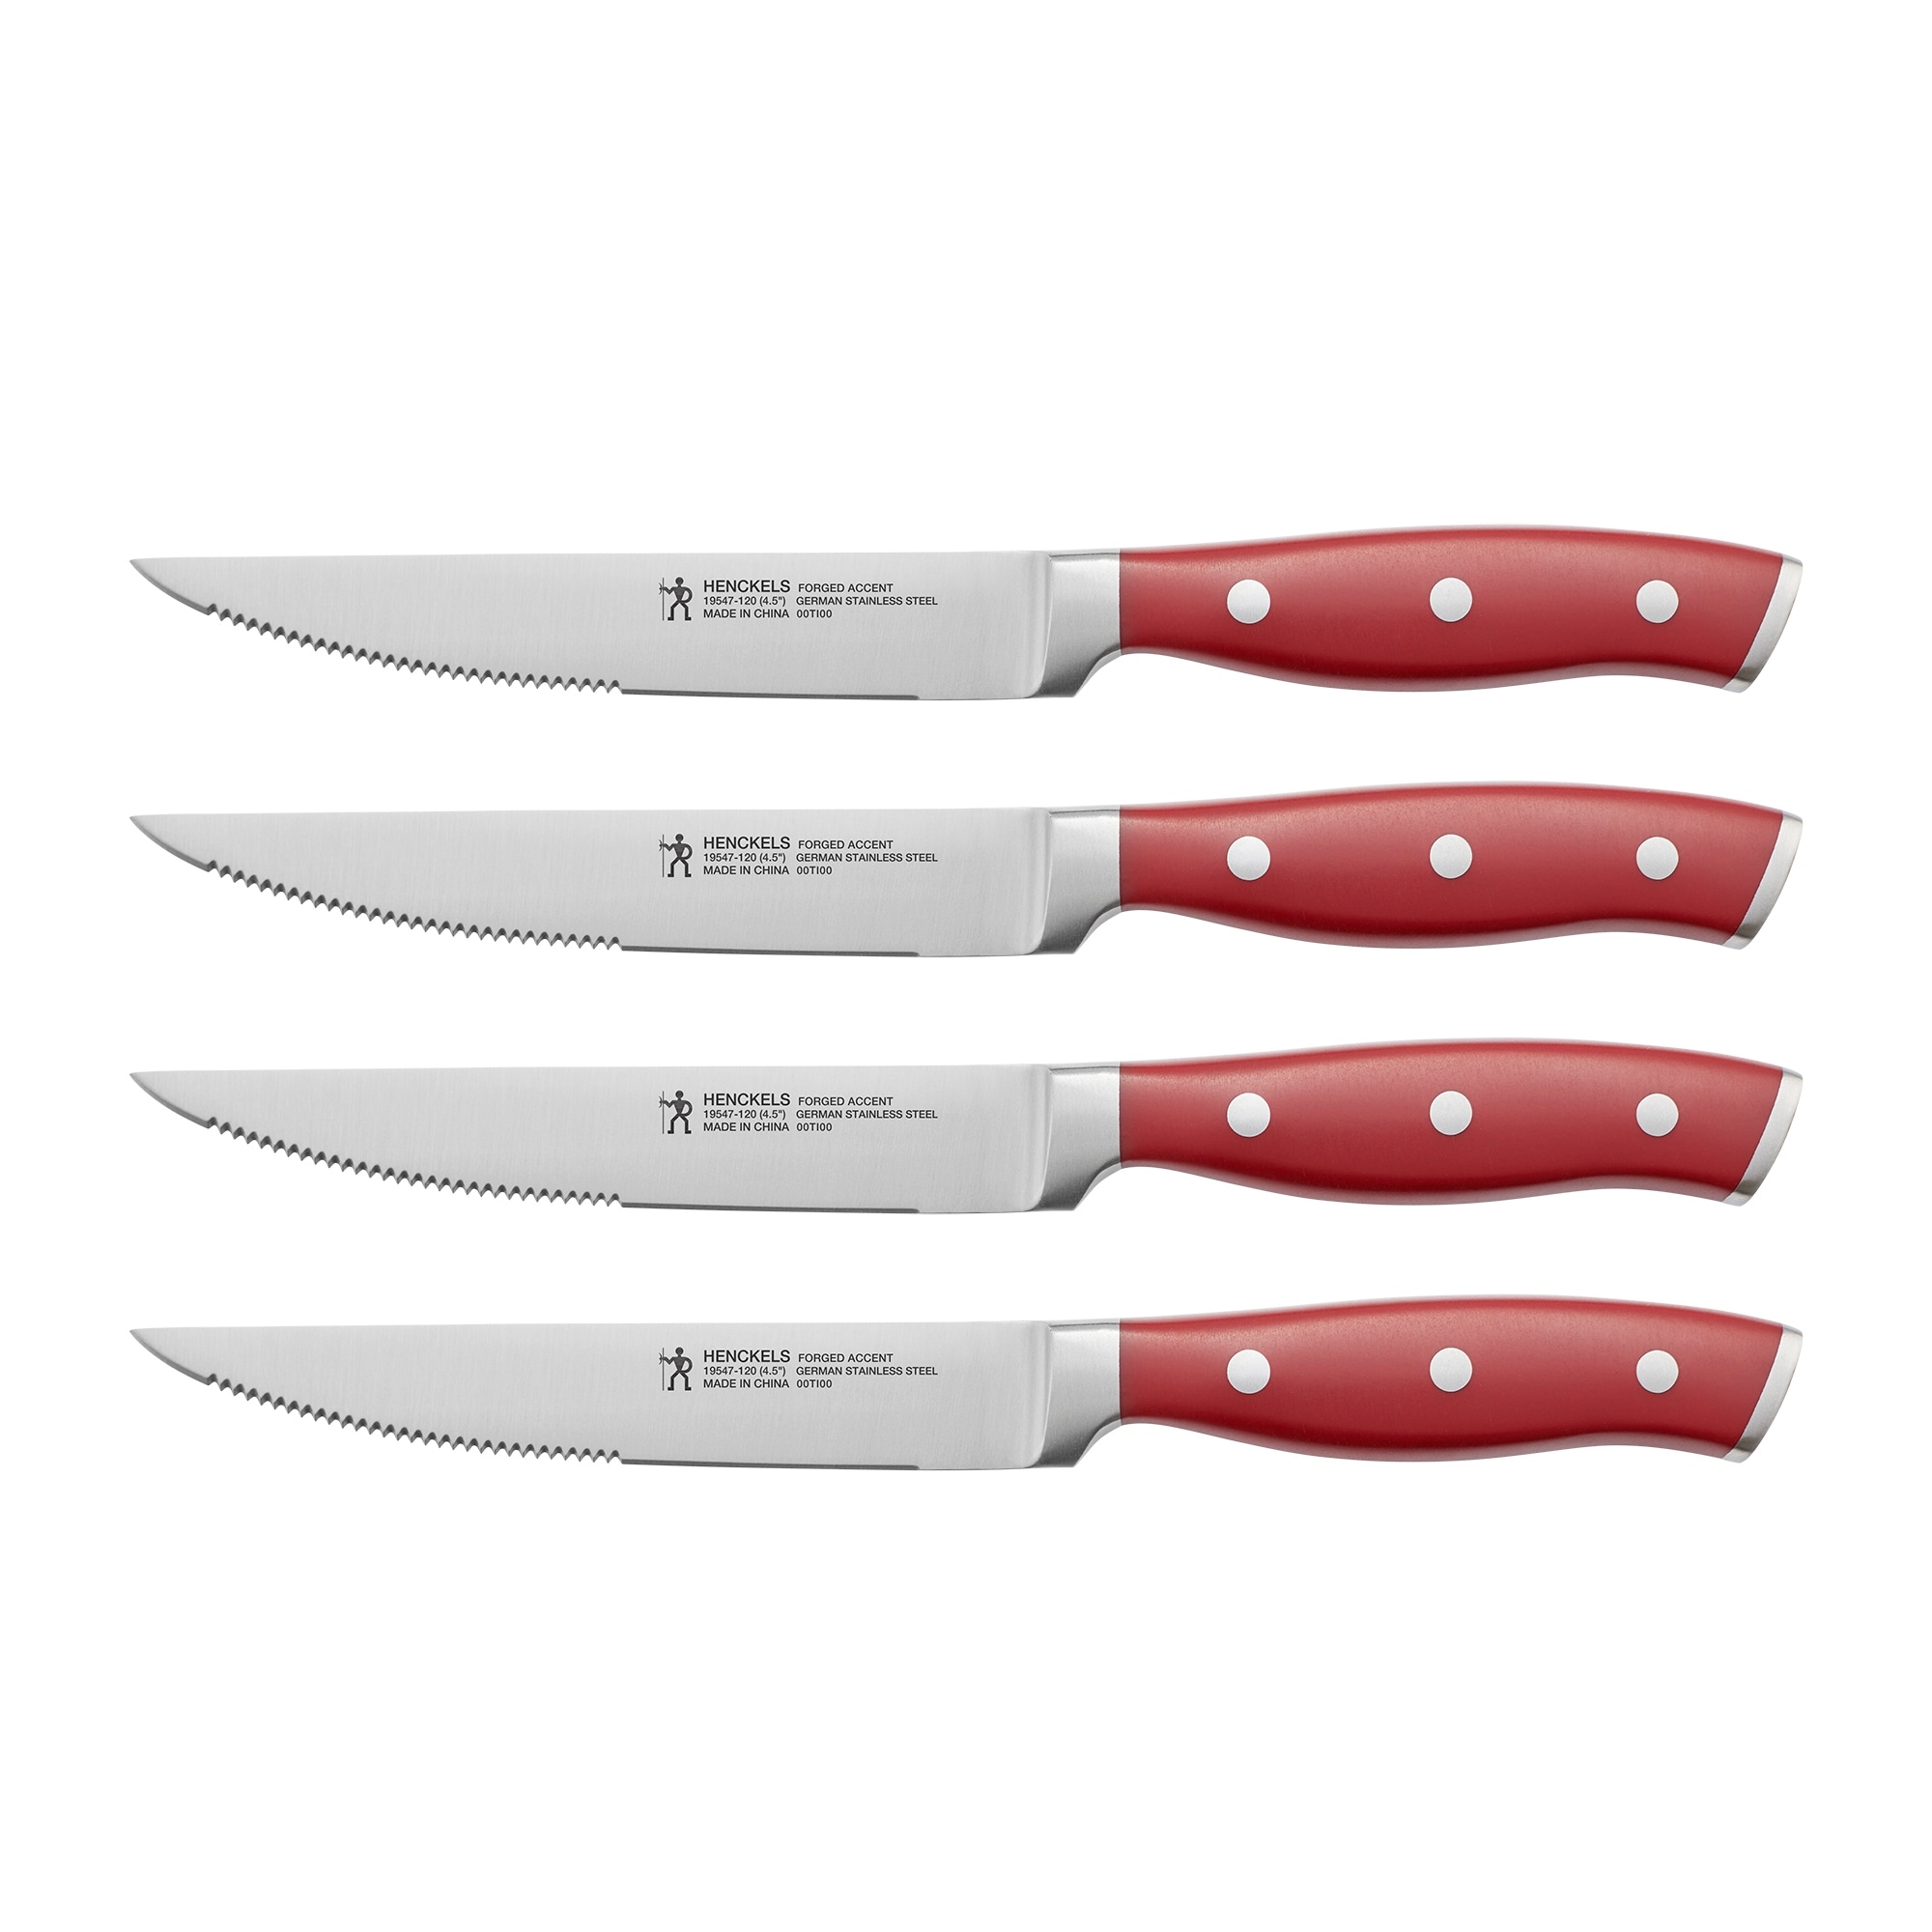 https://ak1.ostkcdn.com/images/products/is/images/direct/355ad0262f11bb63ecf622968ca108ce0abebfb3/Henckels-Forged-Accent-4-pc-Steak-Knife-Set.jpg